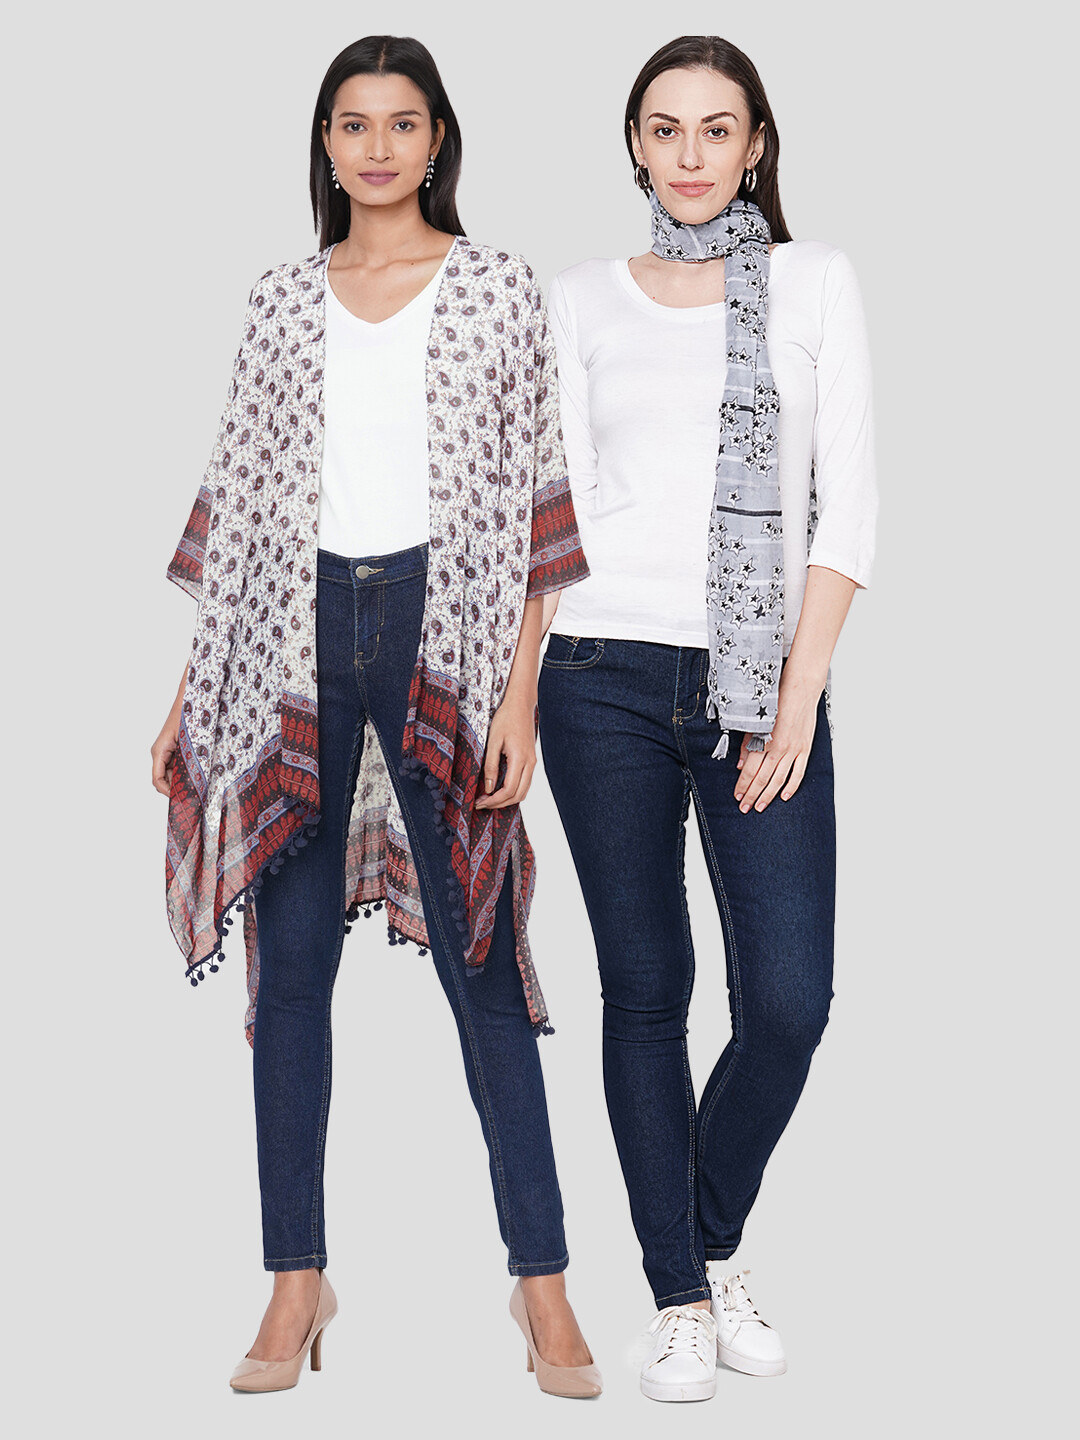 Stylist Printed Ponchos & Printed Scarf with Tassels - Combo offer